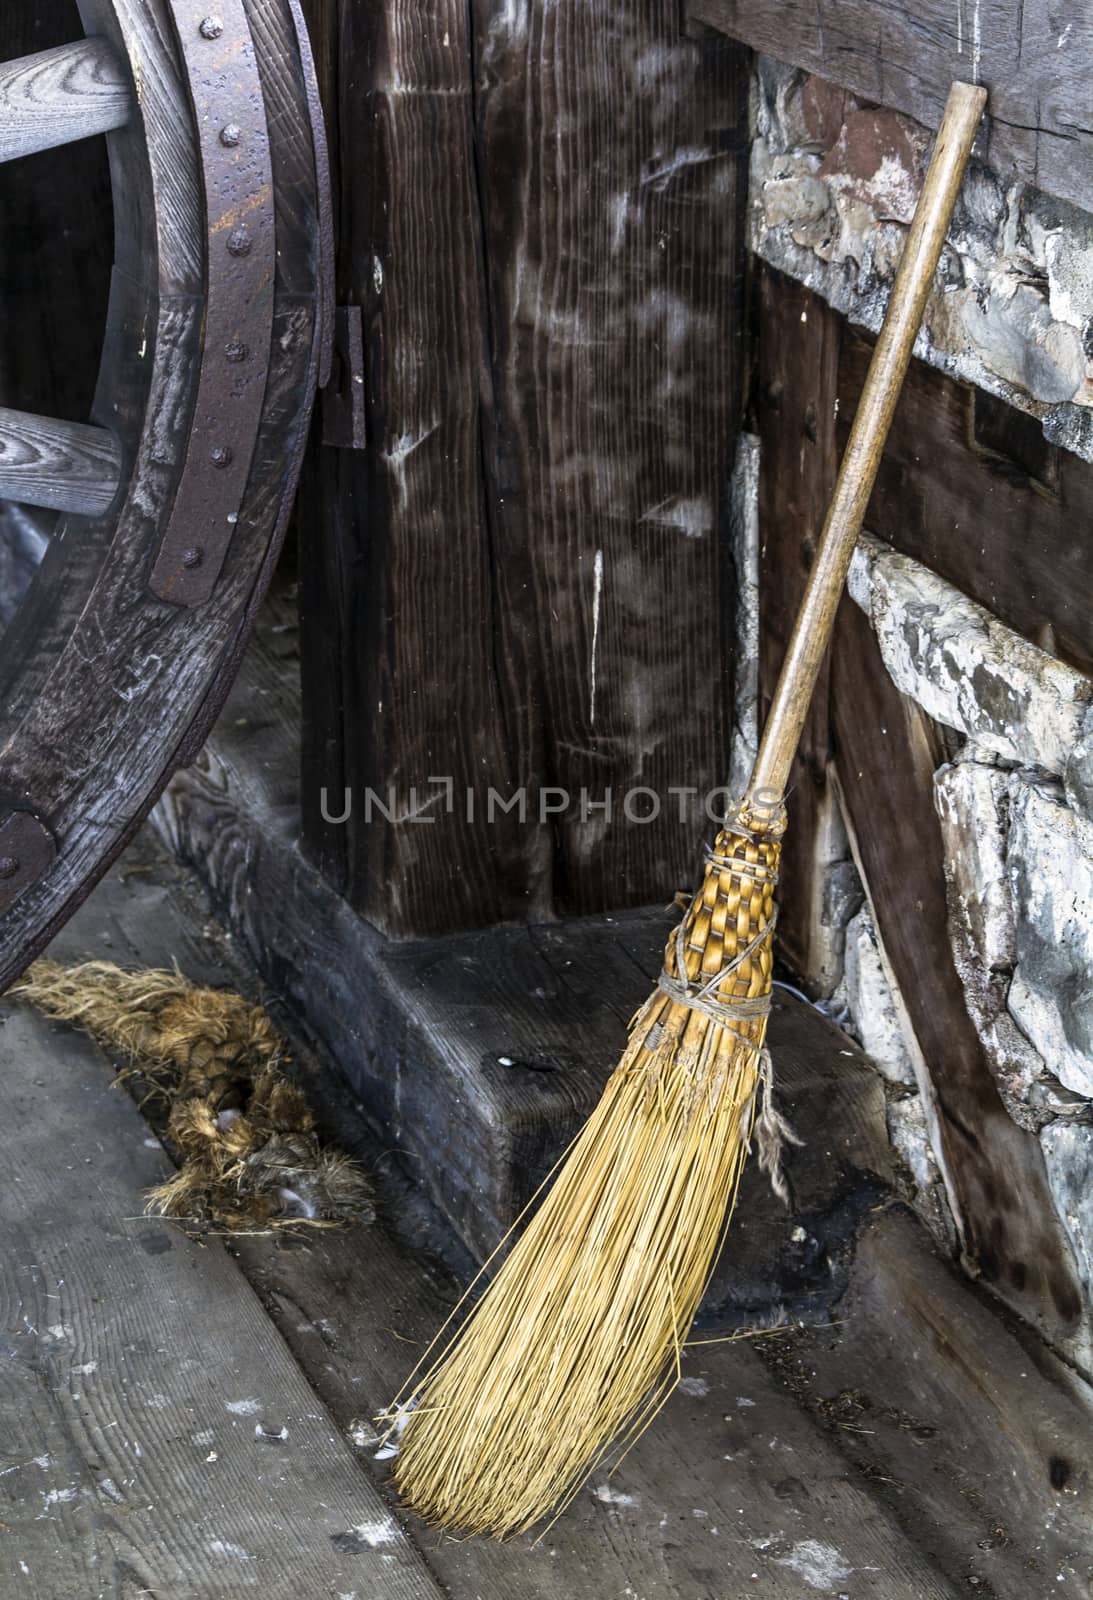 Antique Whisk Broom by fallesenphotography